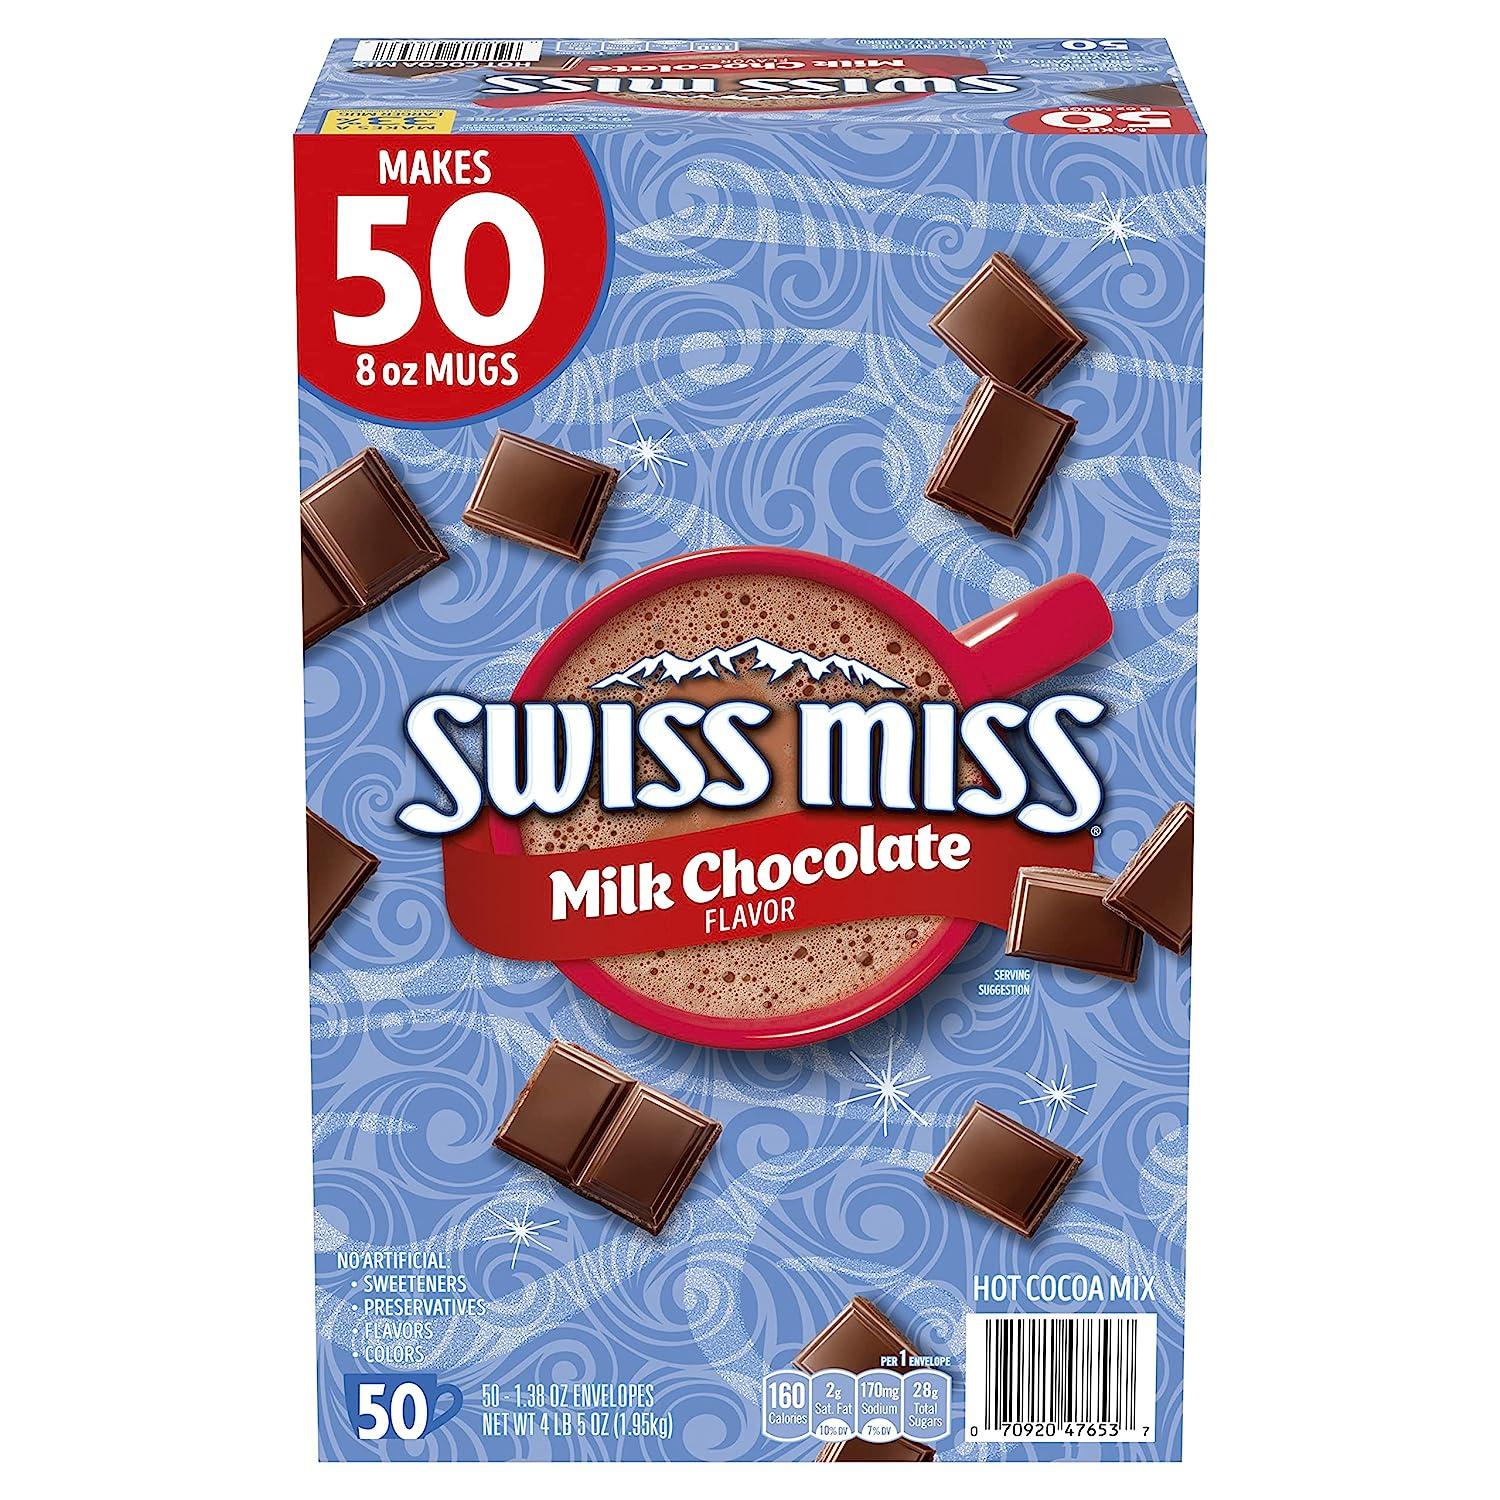 Swiss Miss Milk Chocolate Hot Cocoa Mix Packets for $5.30 Shipped